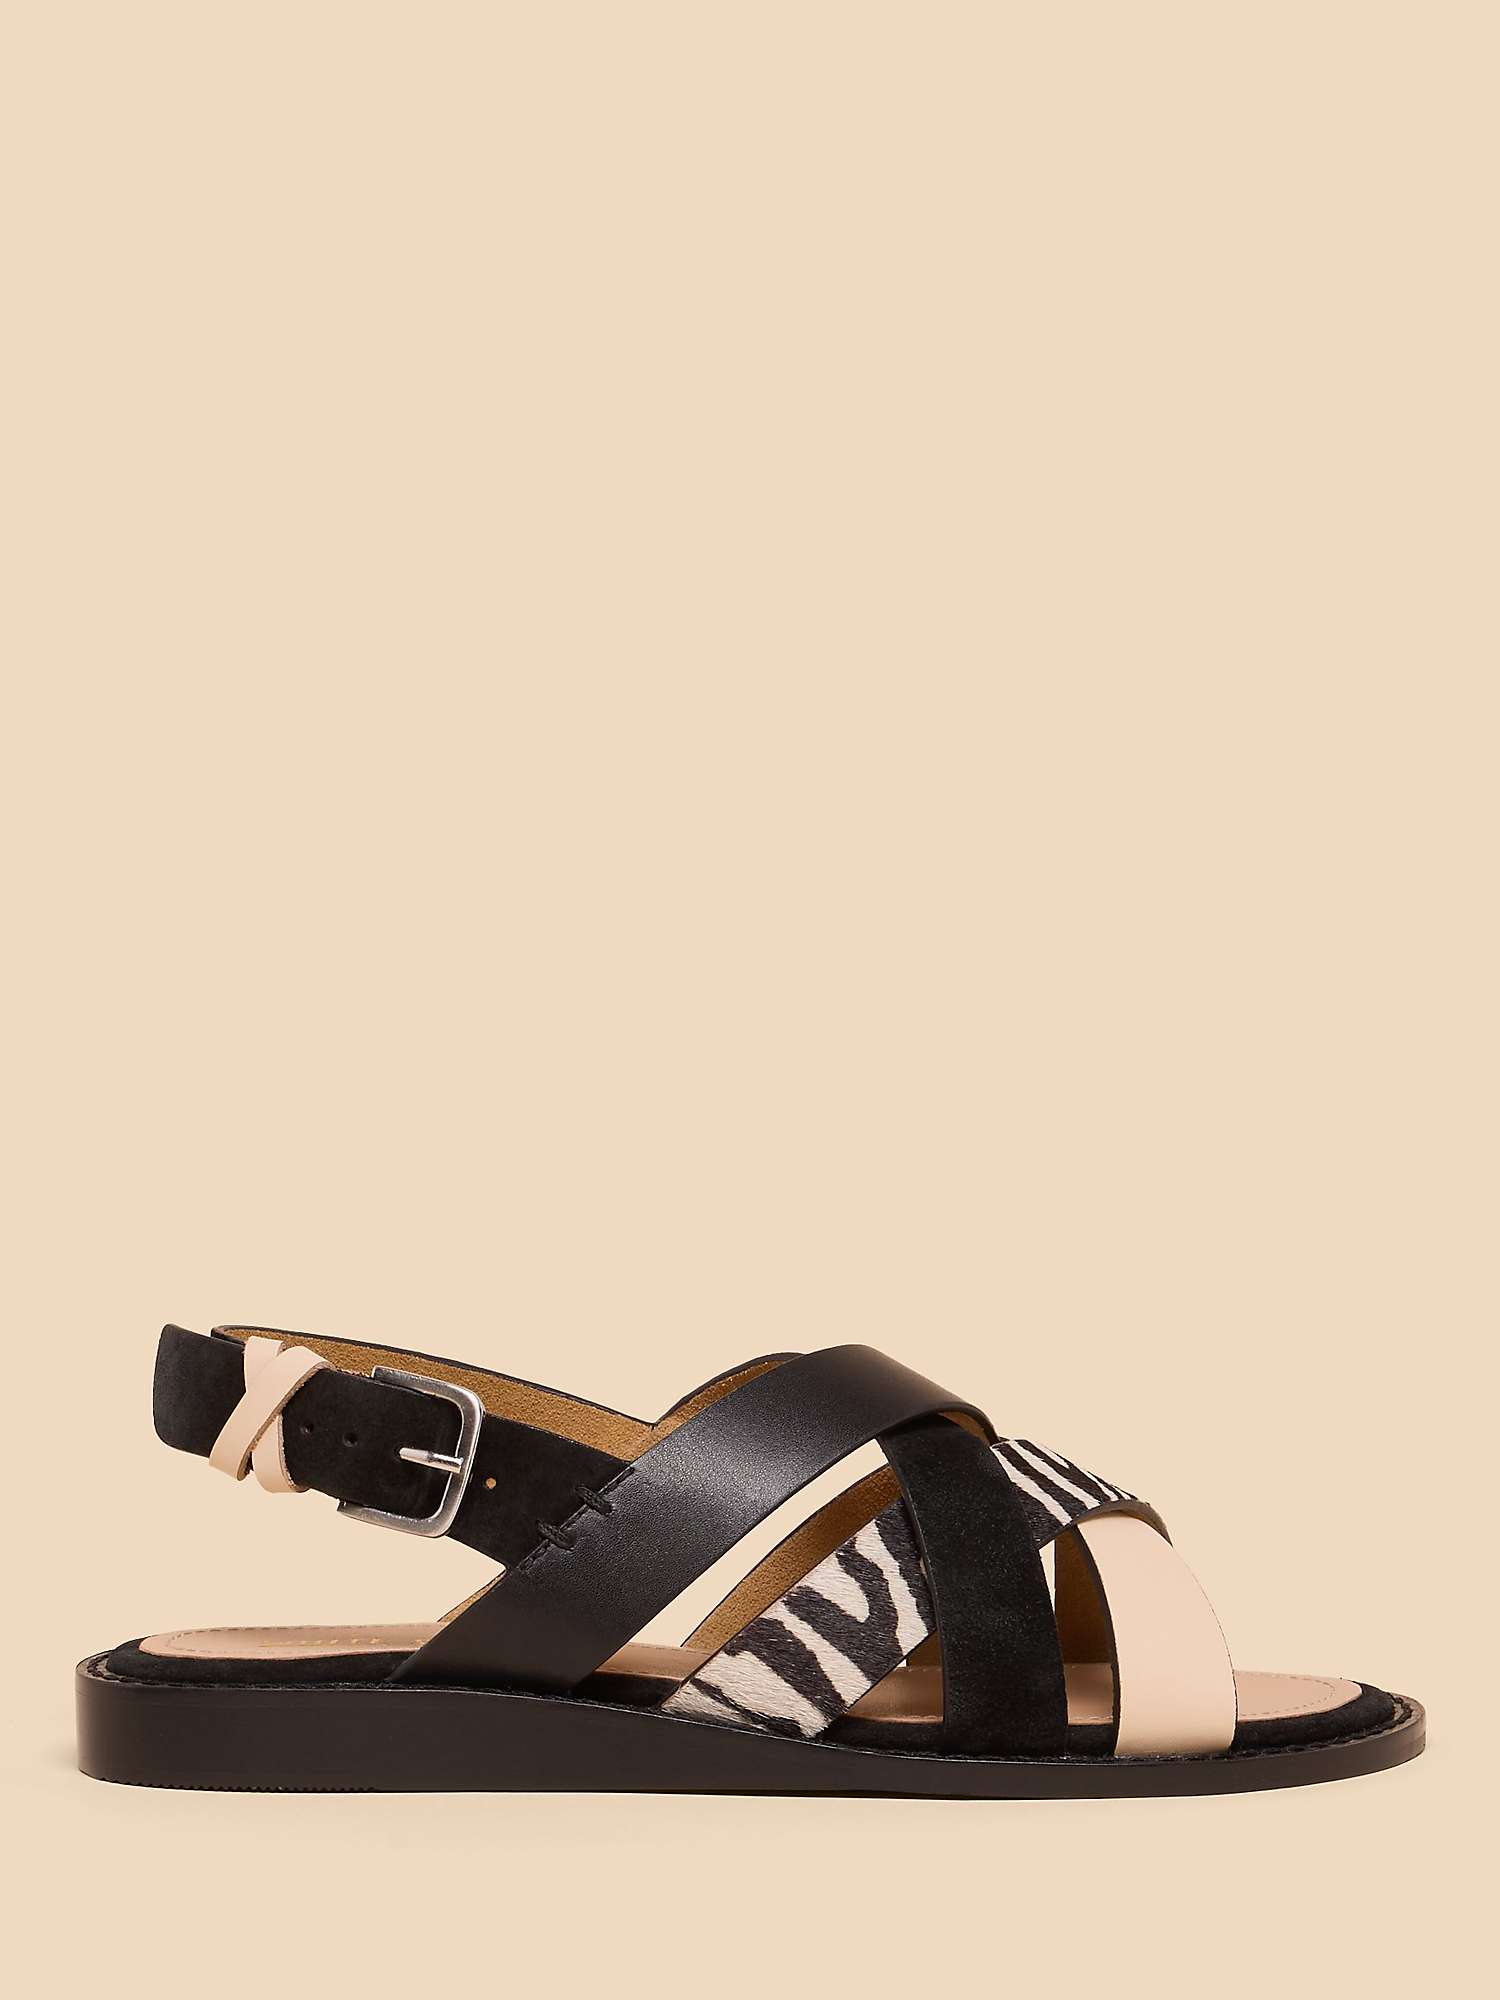 Buy White Stuff Holly Wedge Strappy Sandals Online at johnlewis.com